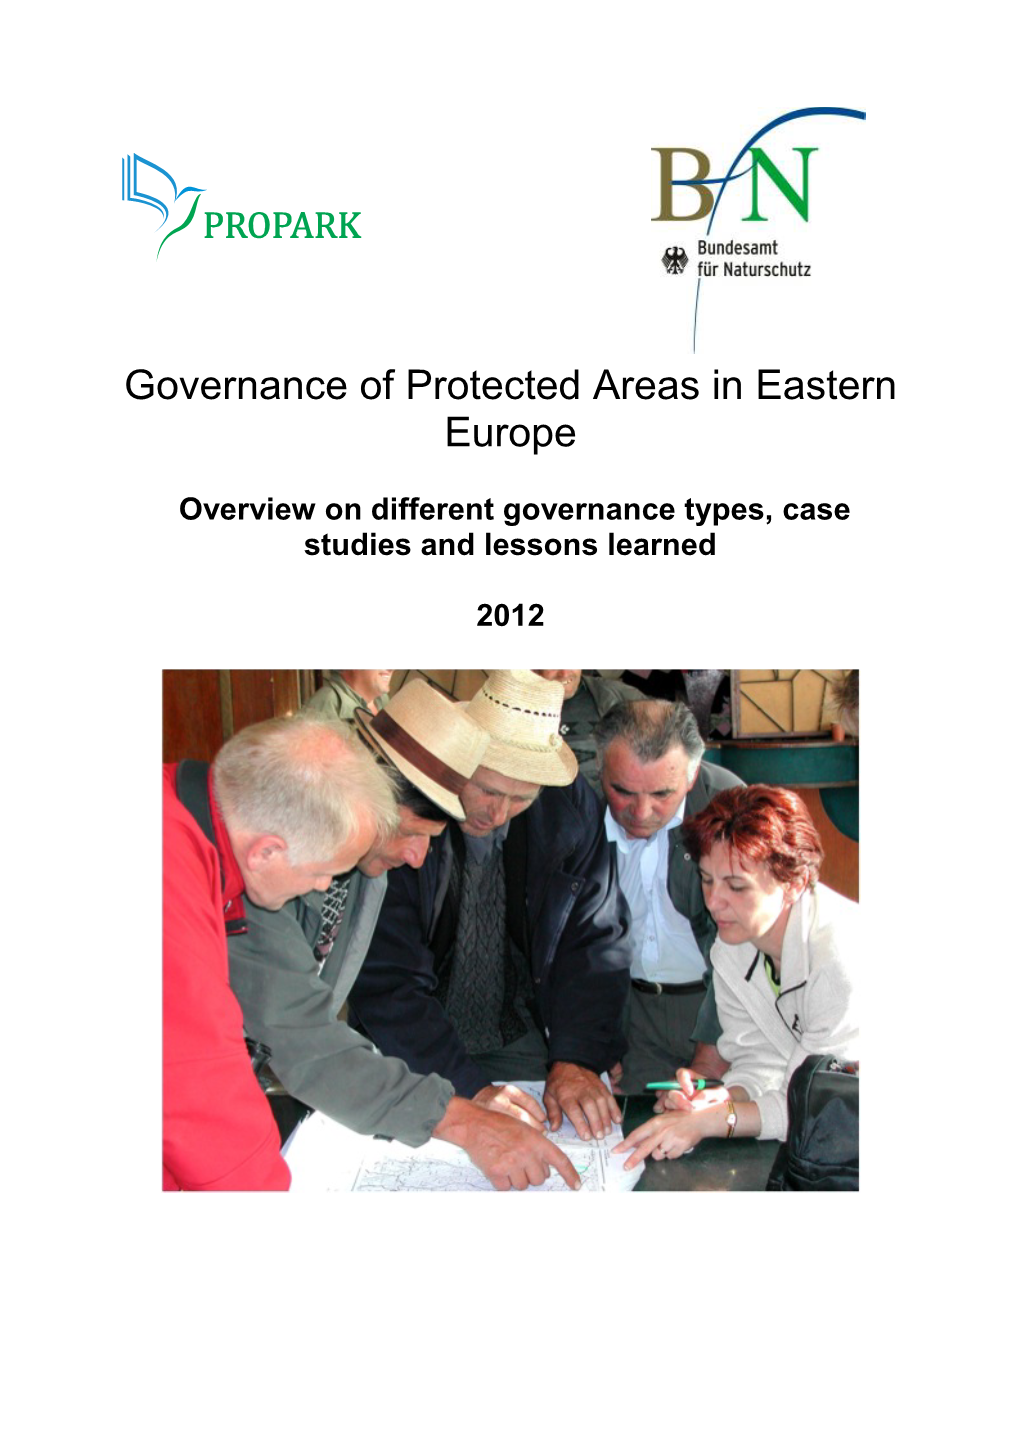 Governance of Protected Areas in Eastern Europe